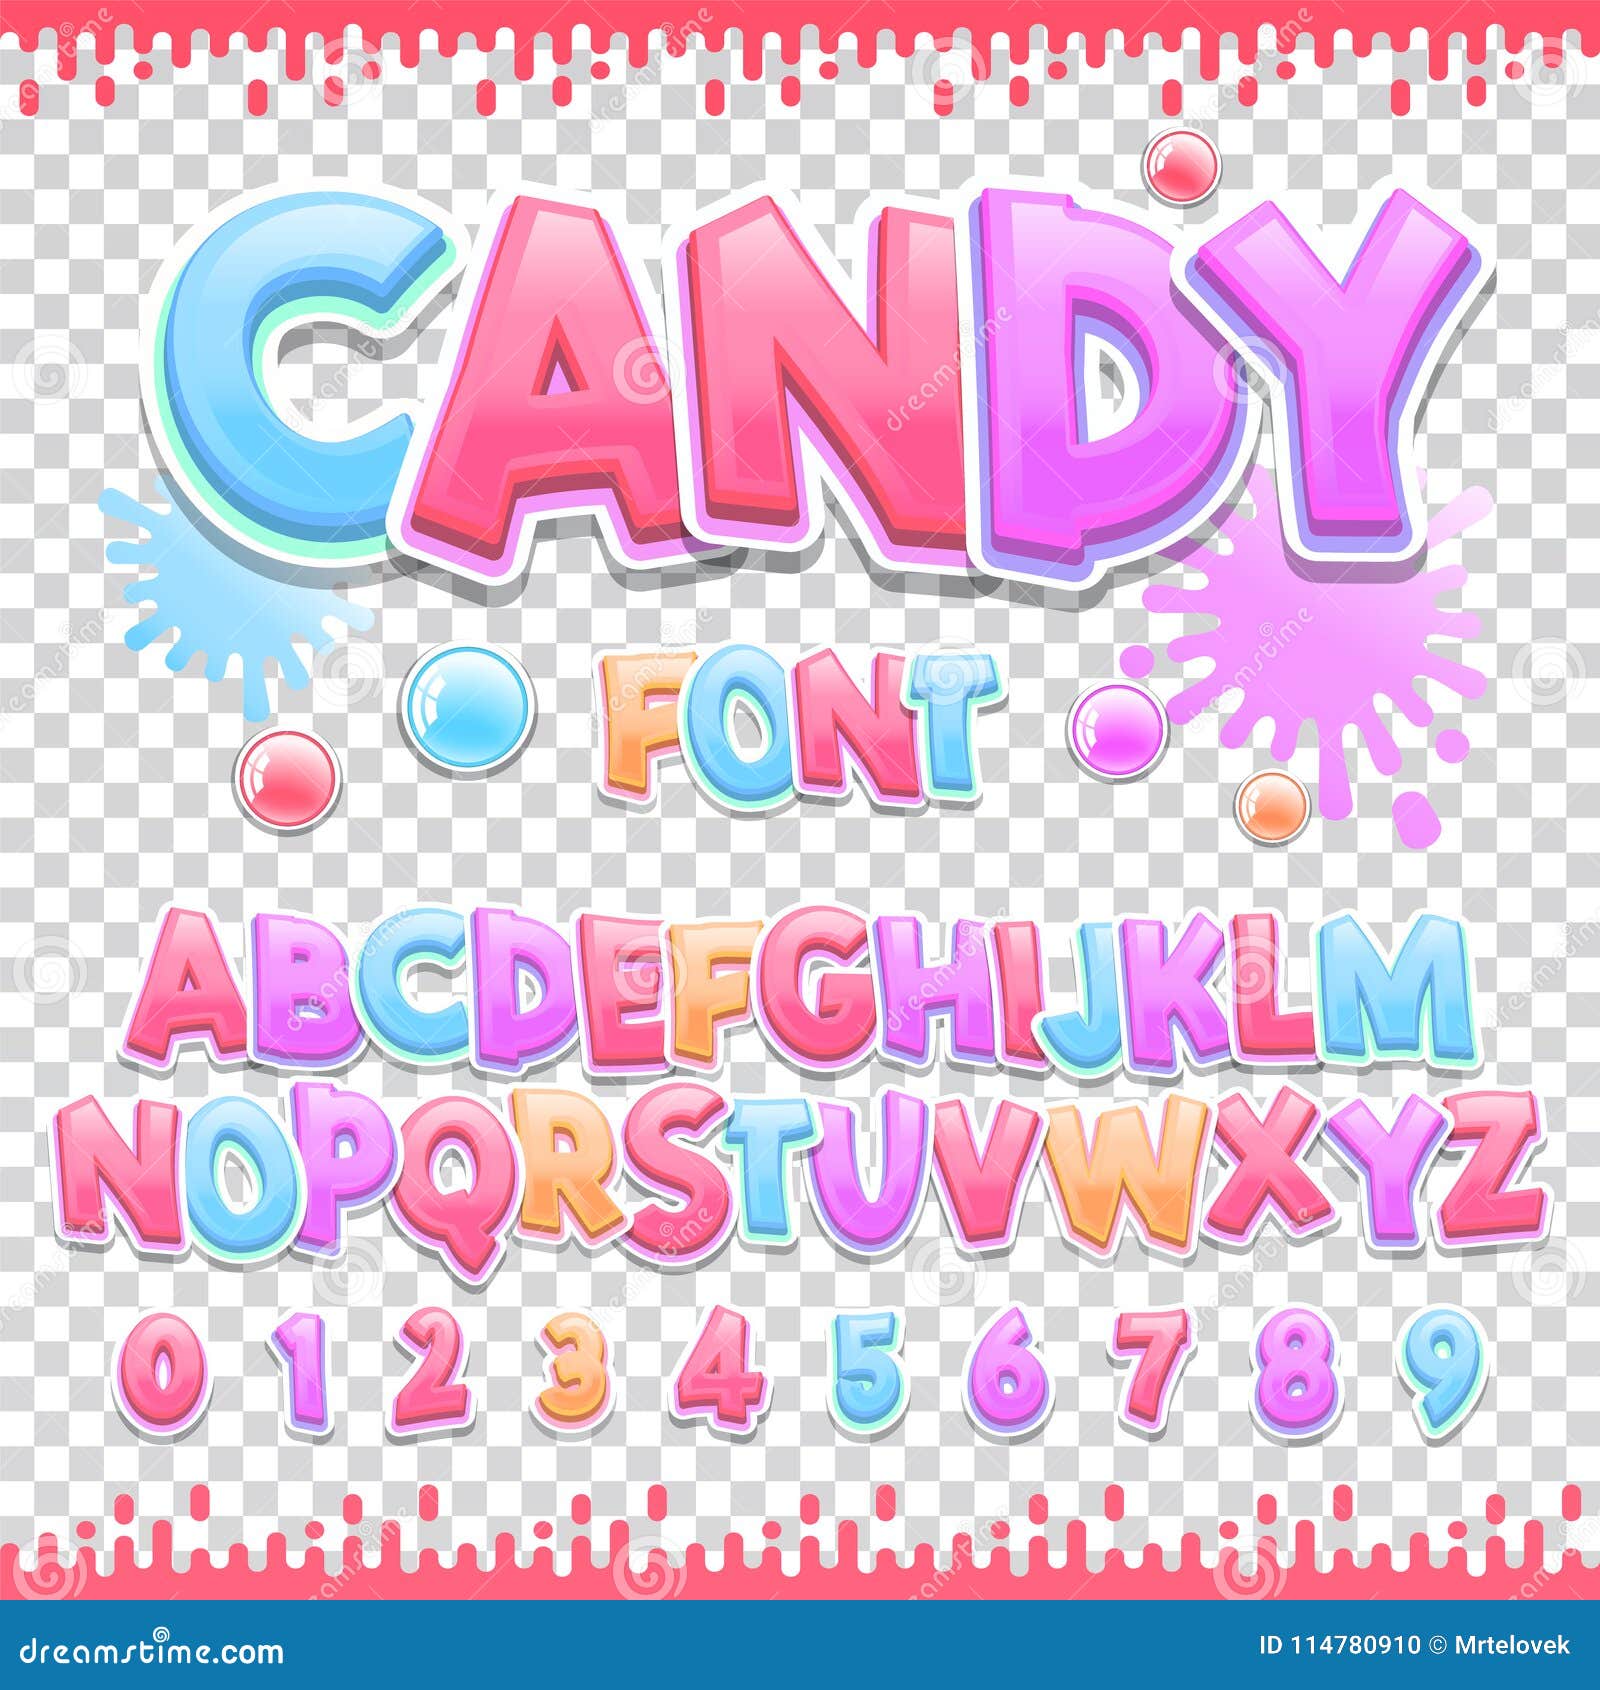 Candy Latin Font Design Sweet Abc Letters And Numbers Cute